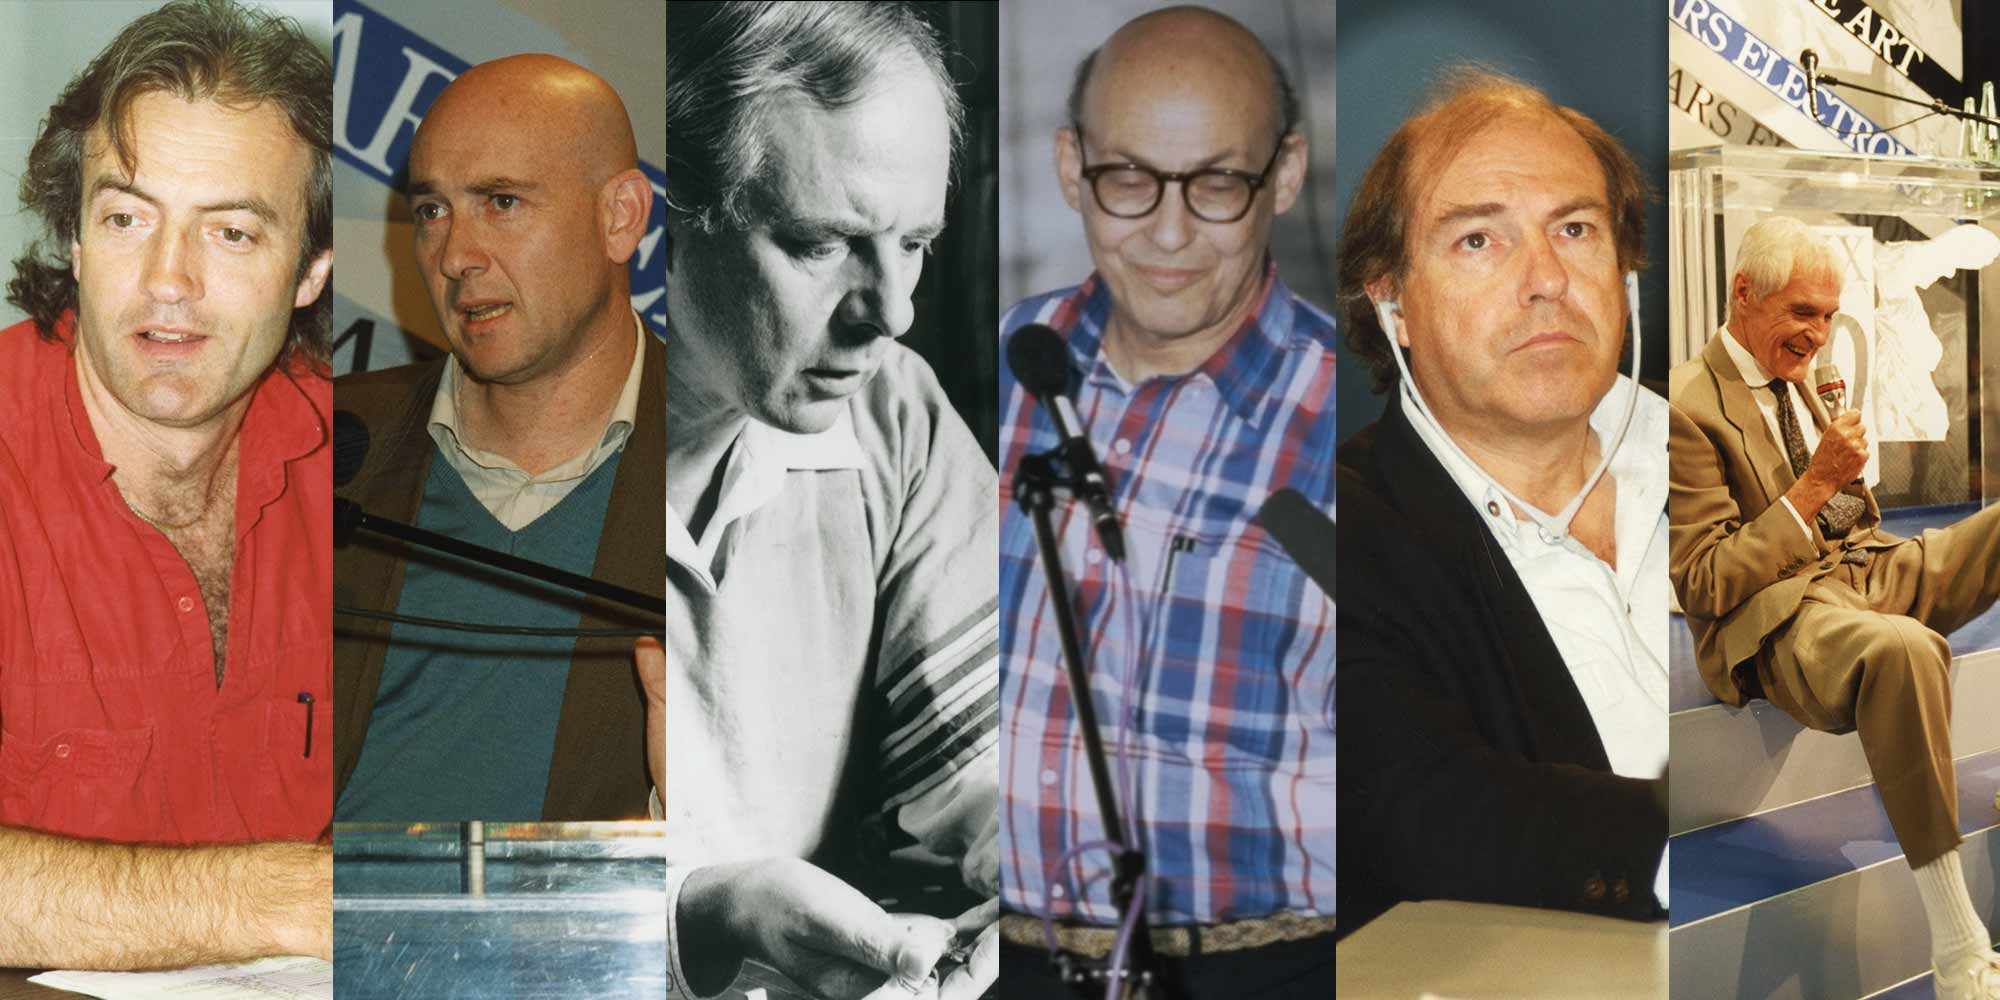 <strong>1990</strong>: Bill Buxton, Jeffrey Shaw, Karl Heinz Stockhausen, Marvin Minsky, Roy Ascott and Timothy Leary meet in Linz.